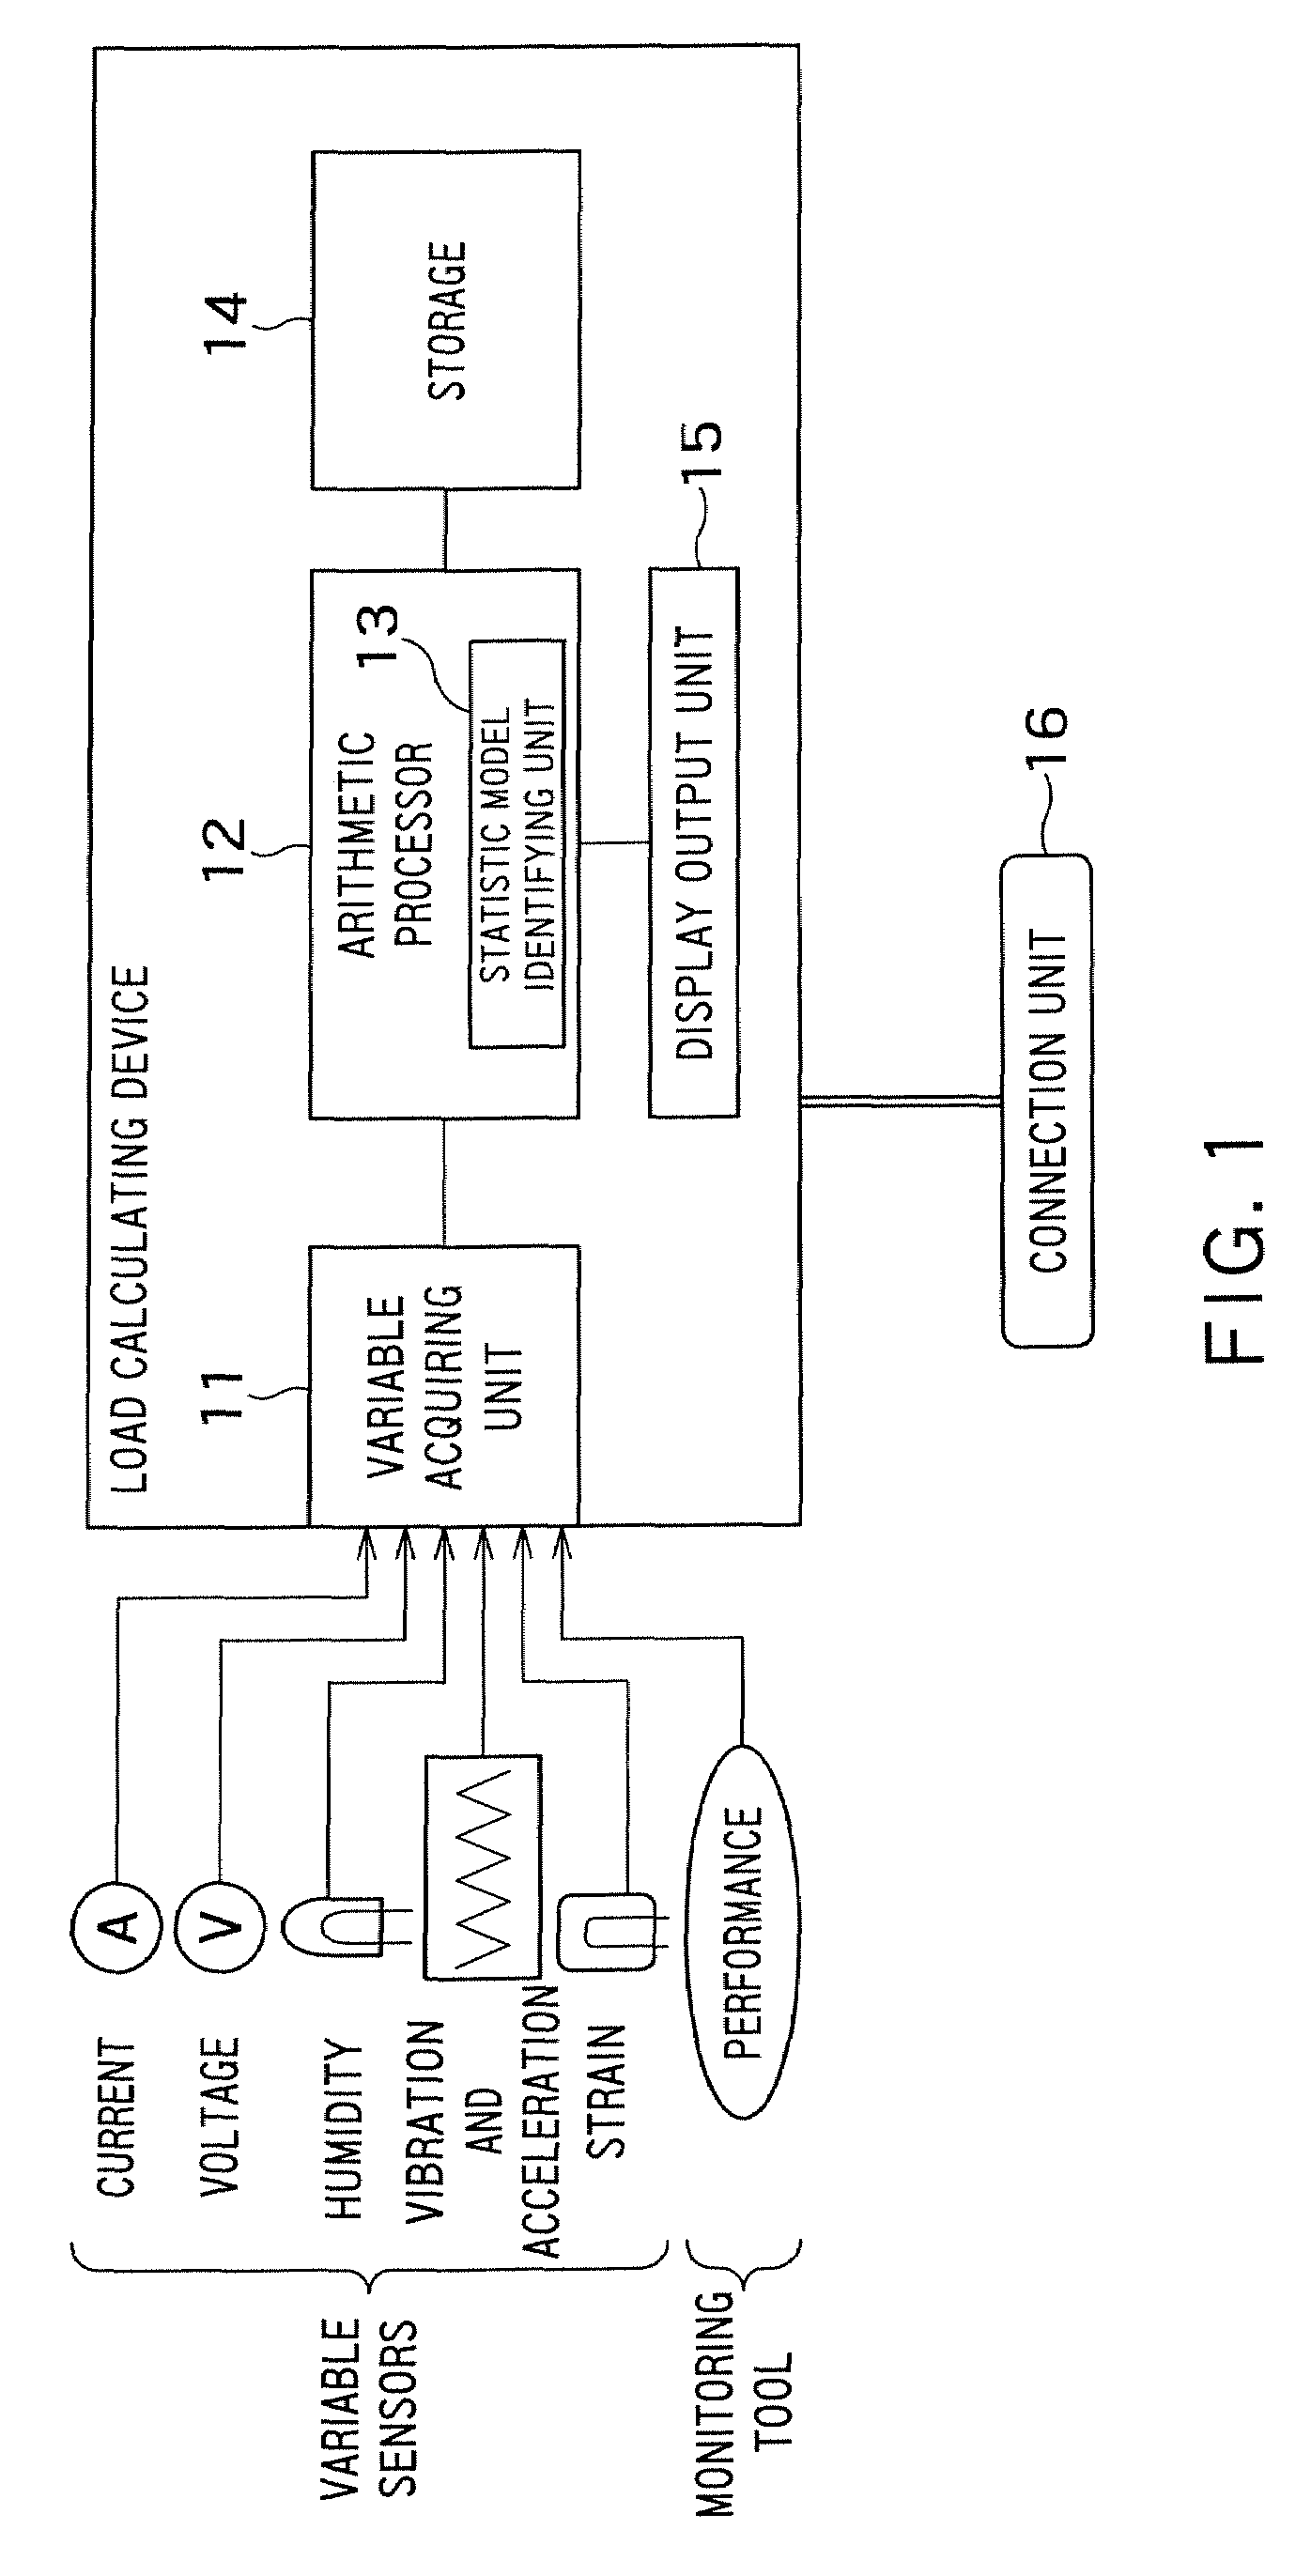 Load calculating device and load calculating method